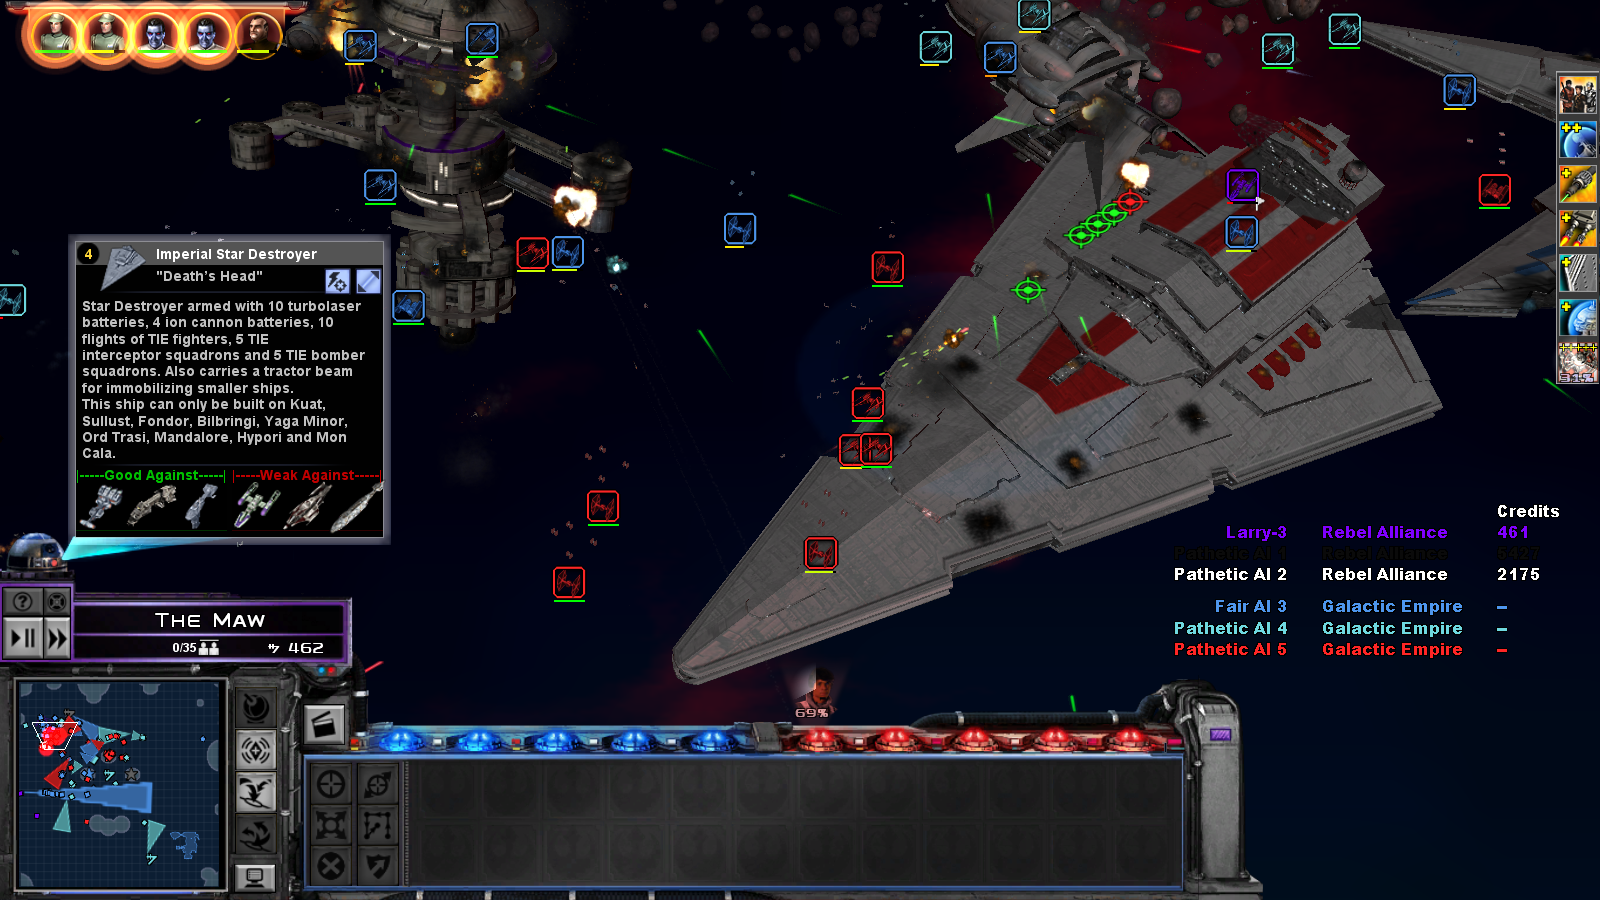 Fitting name for a ship... image - Alliance at War mod for Star Wars:  Empire at War: Forces of Corruption - Mod DB